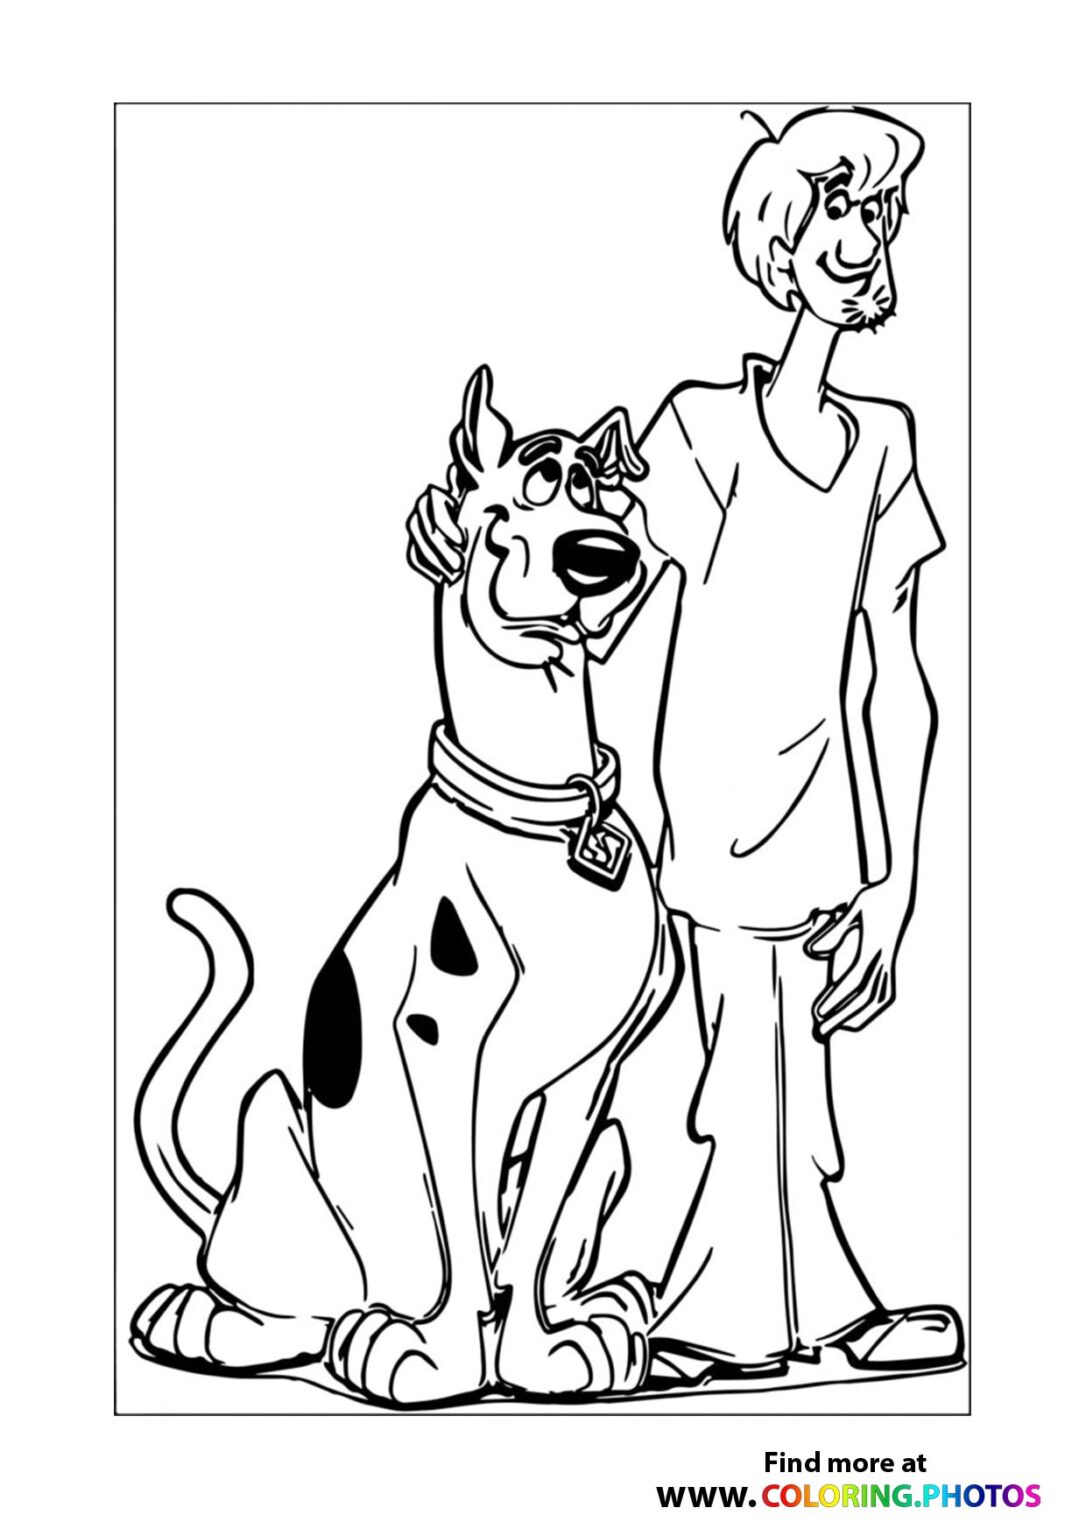 Scooby-Doo and Shaggy - Coloring Pages for kids